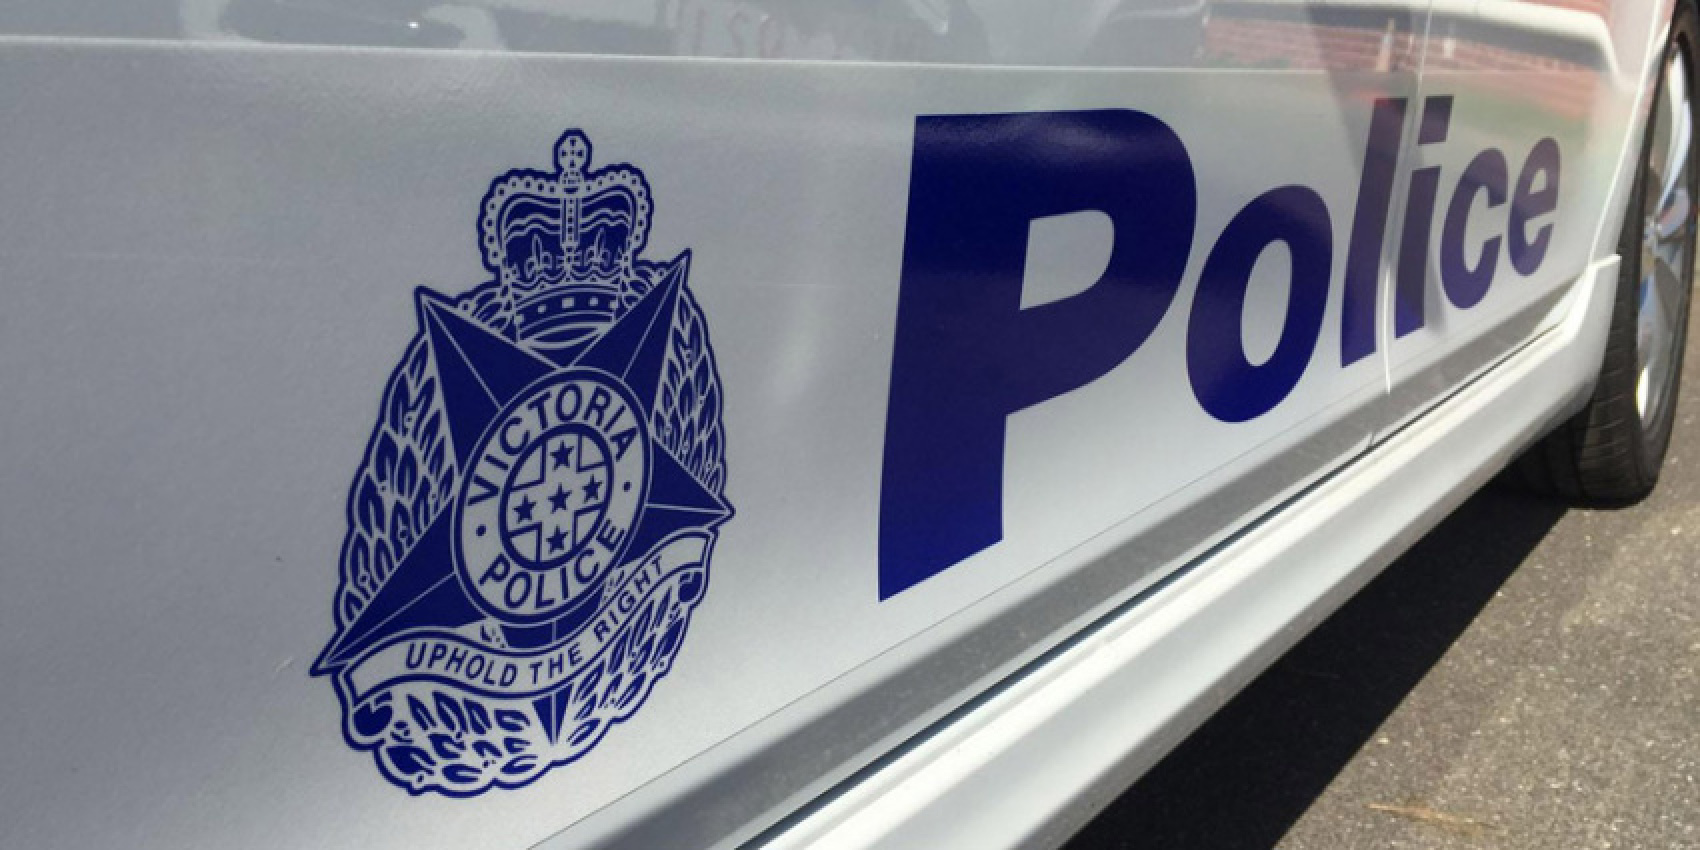 autos, cars, holden, holden cruze makes debut as victorian police vehicle